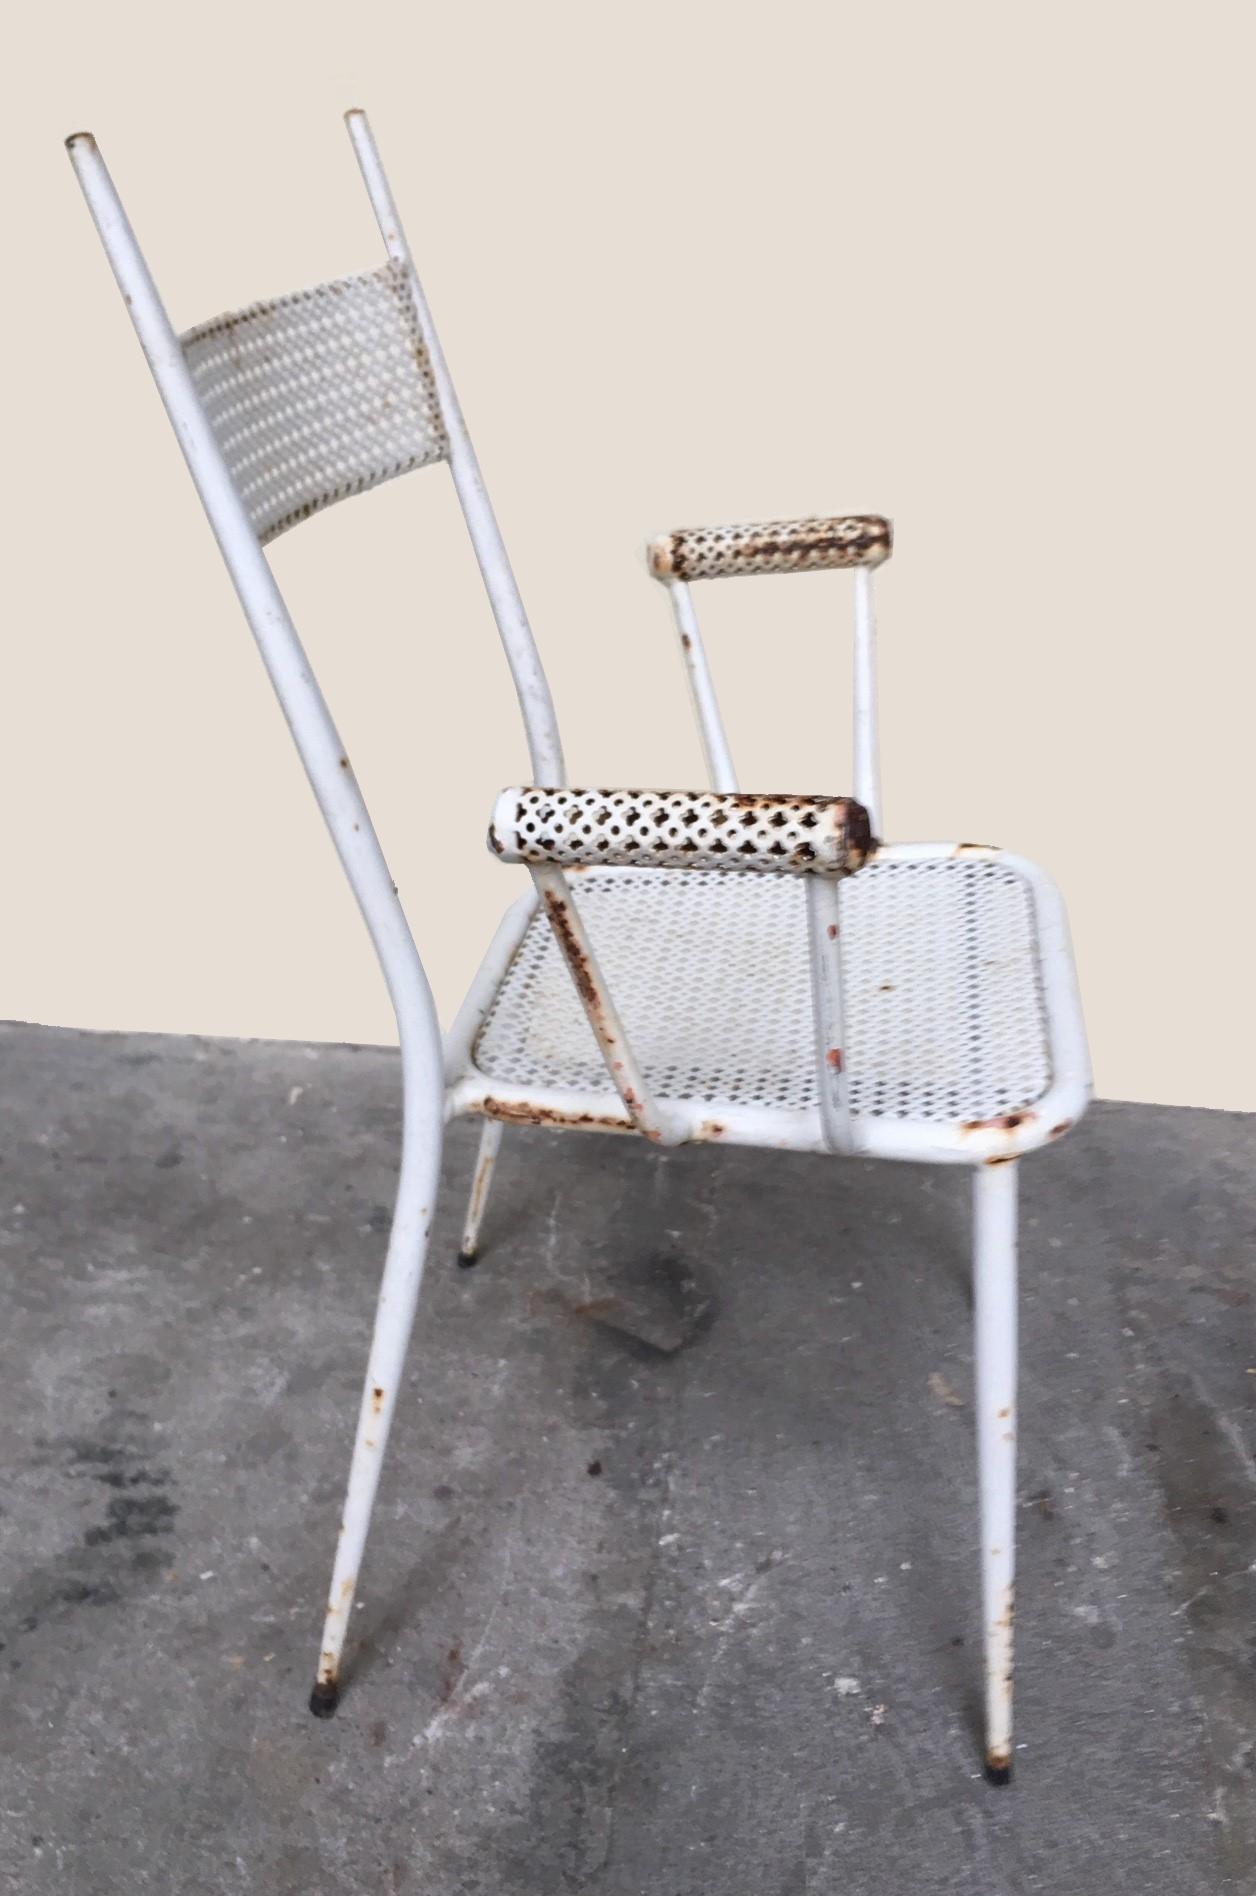 Garden furniture in metal and perforated sheet including a table, two chairs and two armchairs.
France circa 1950 in the style of Mathieu Matégot.

Table dimensions:
Height 26.77 in
Width 31.50 in
Depth 31.50 in

Chairs dimensions:
Height